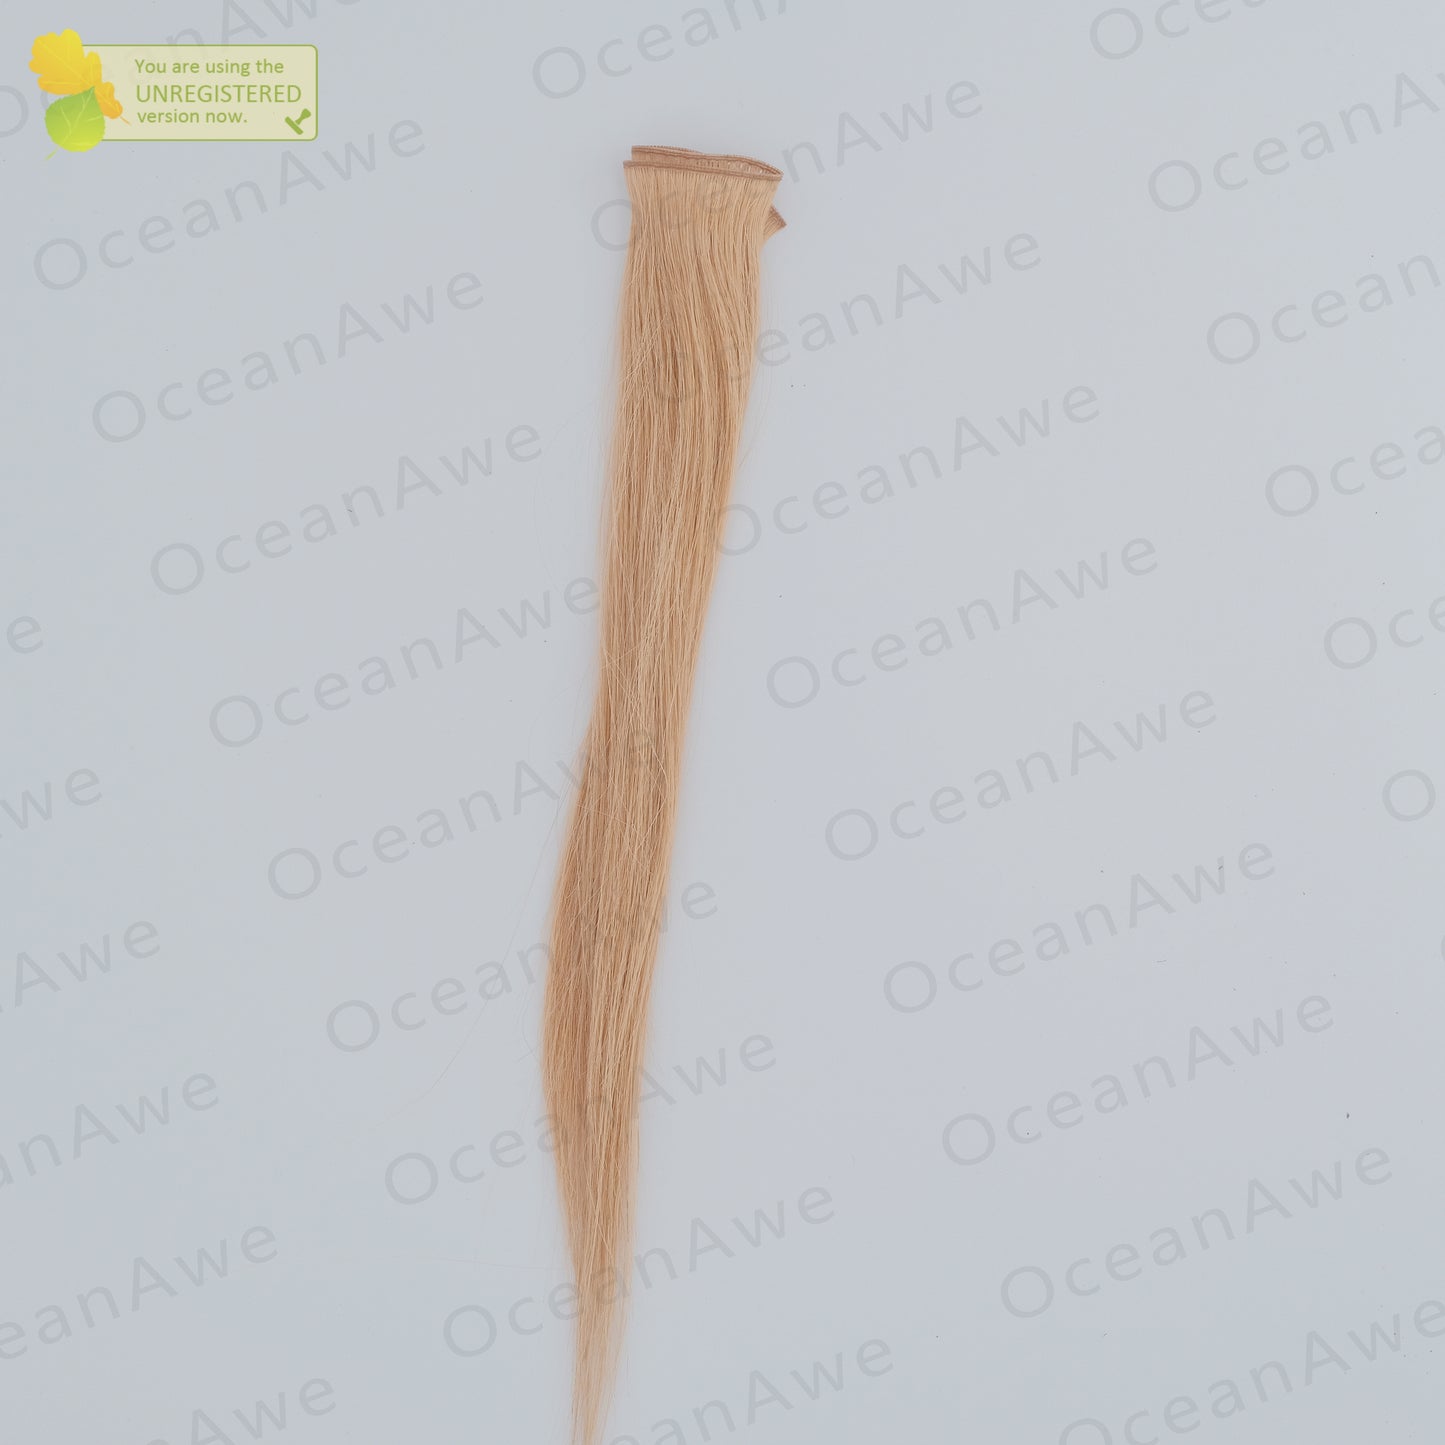 Hand-Tied Wefts